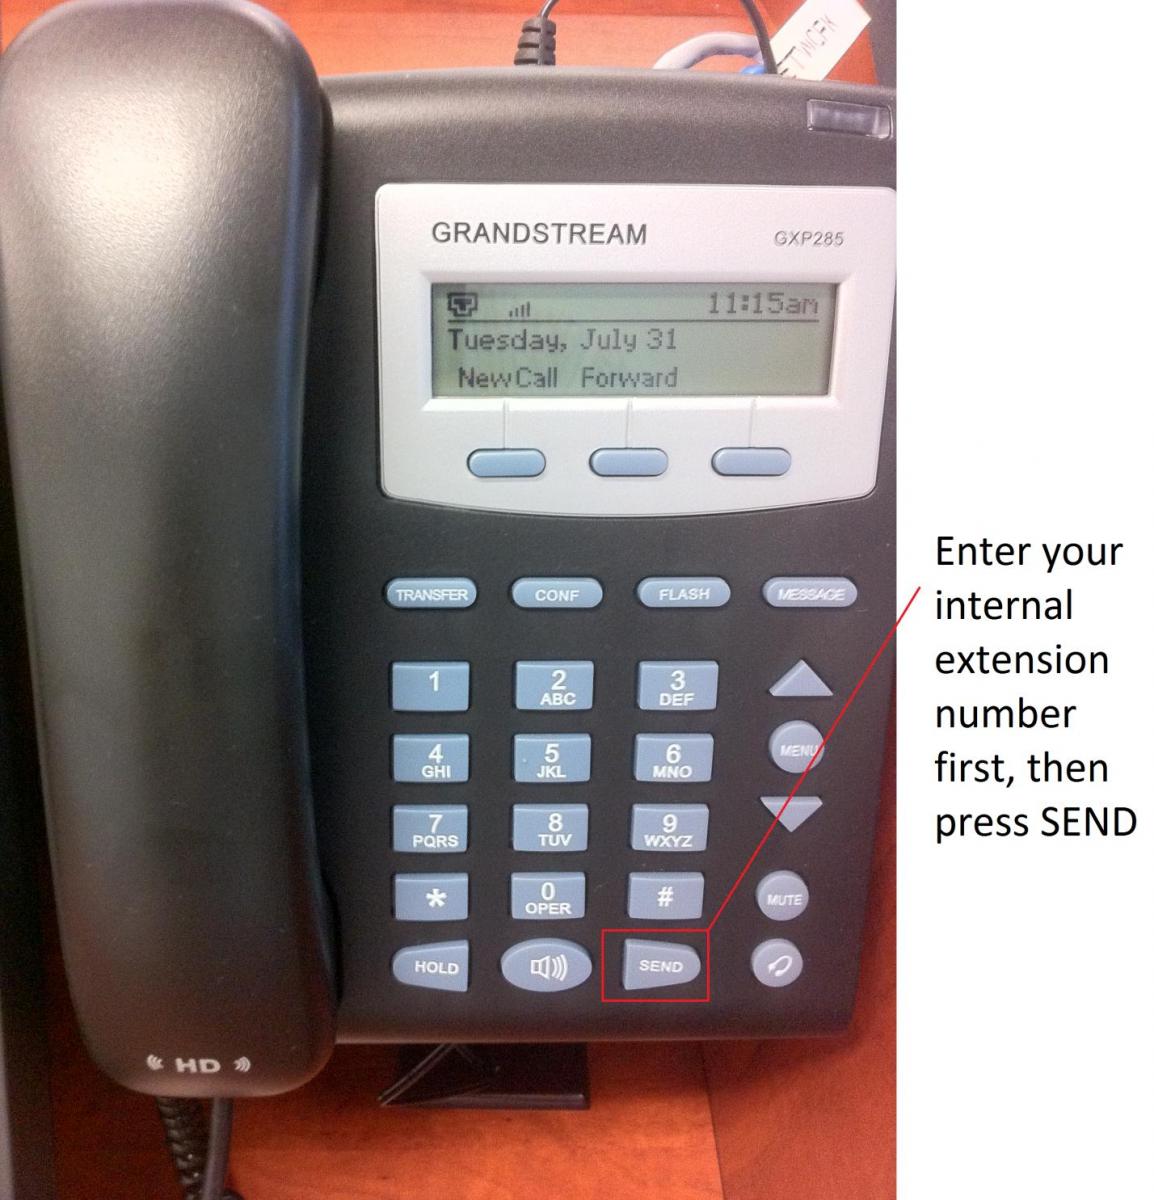 Classroom lectern phone with instructions to enter your internal extension number first, then press "send"